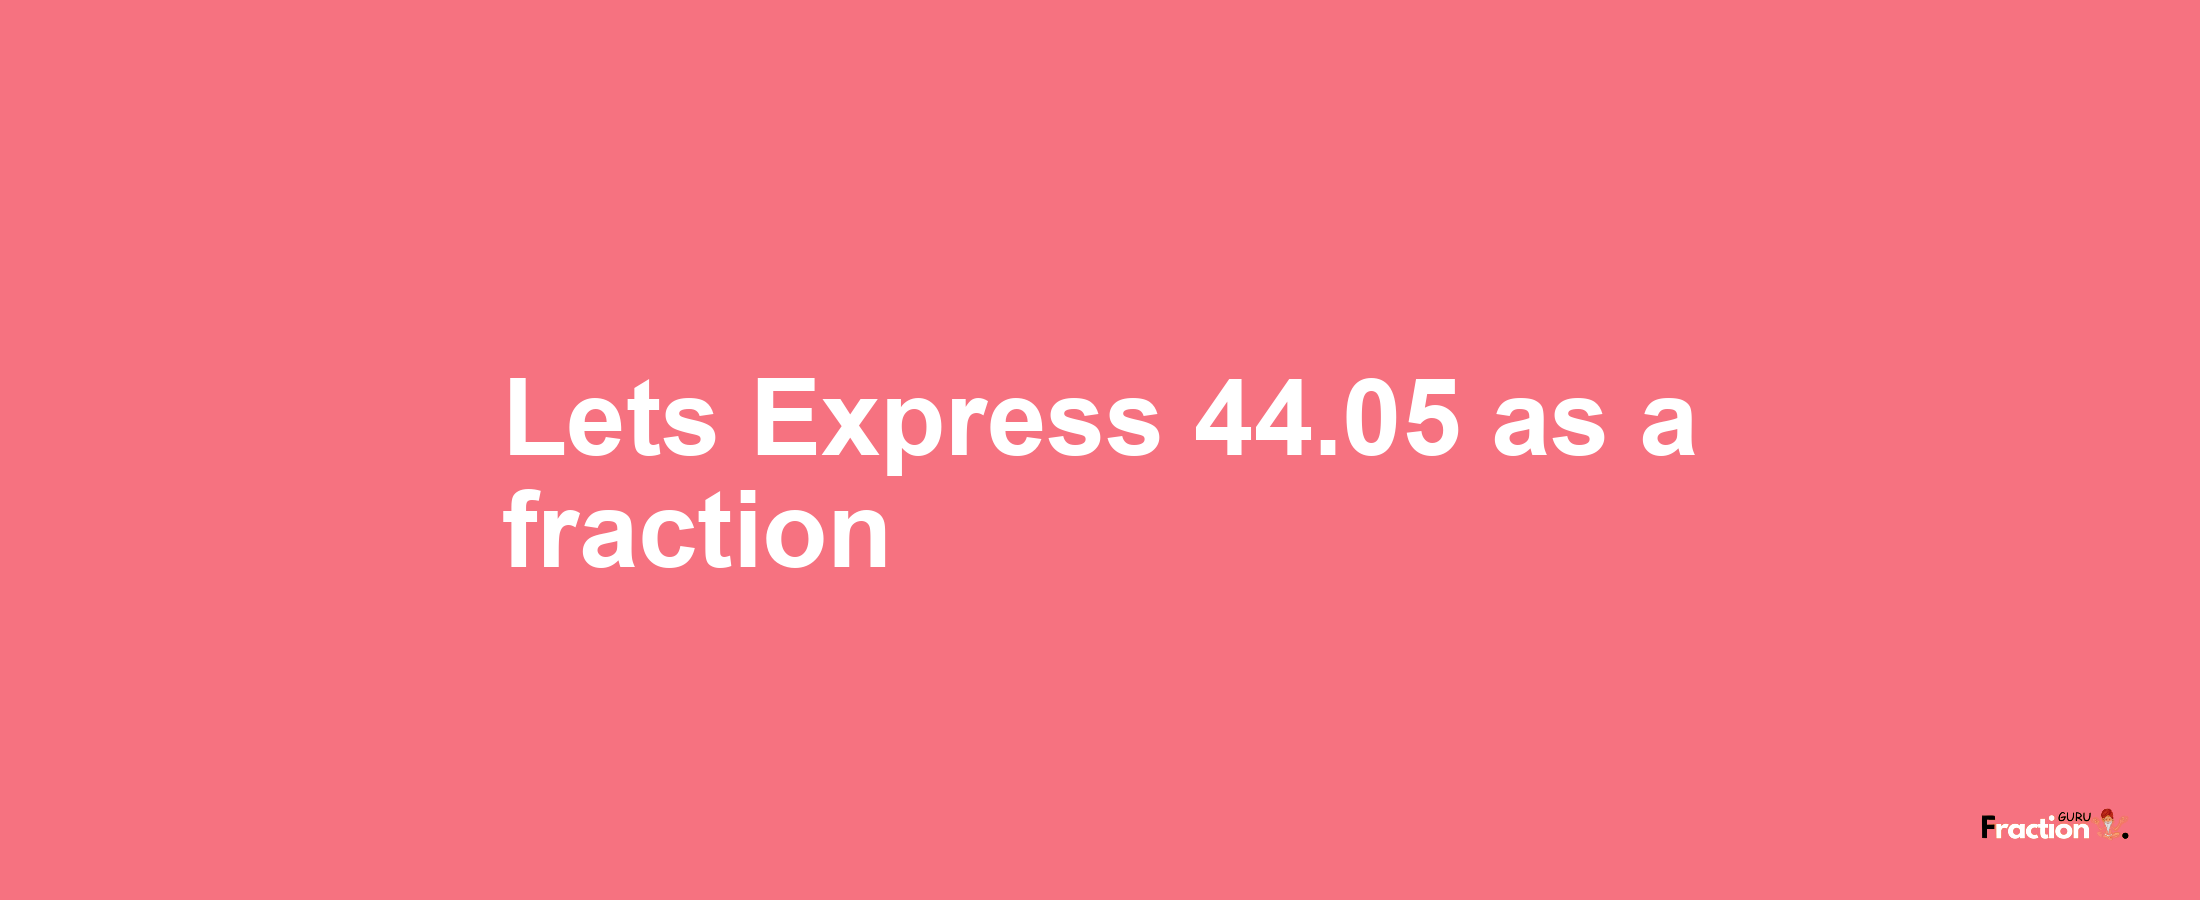 Lets Express 44.05 as afraction